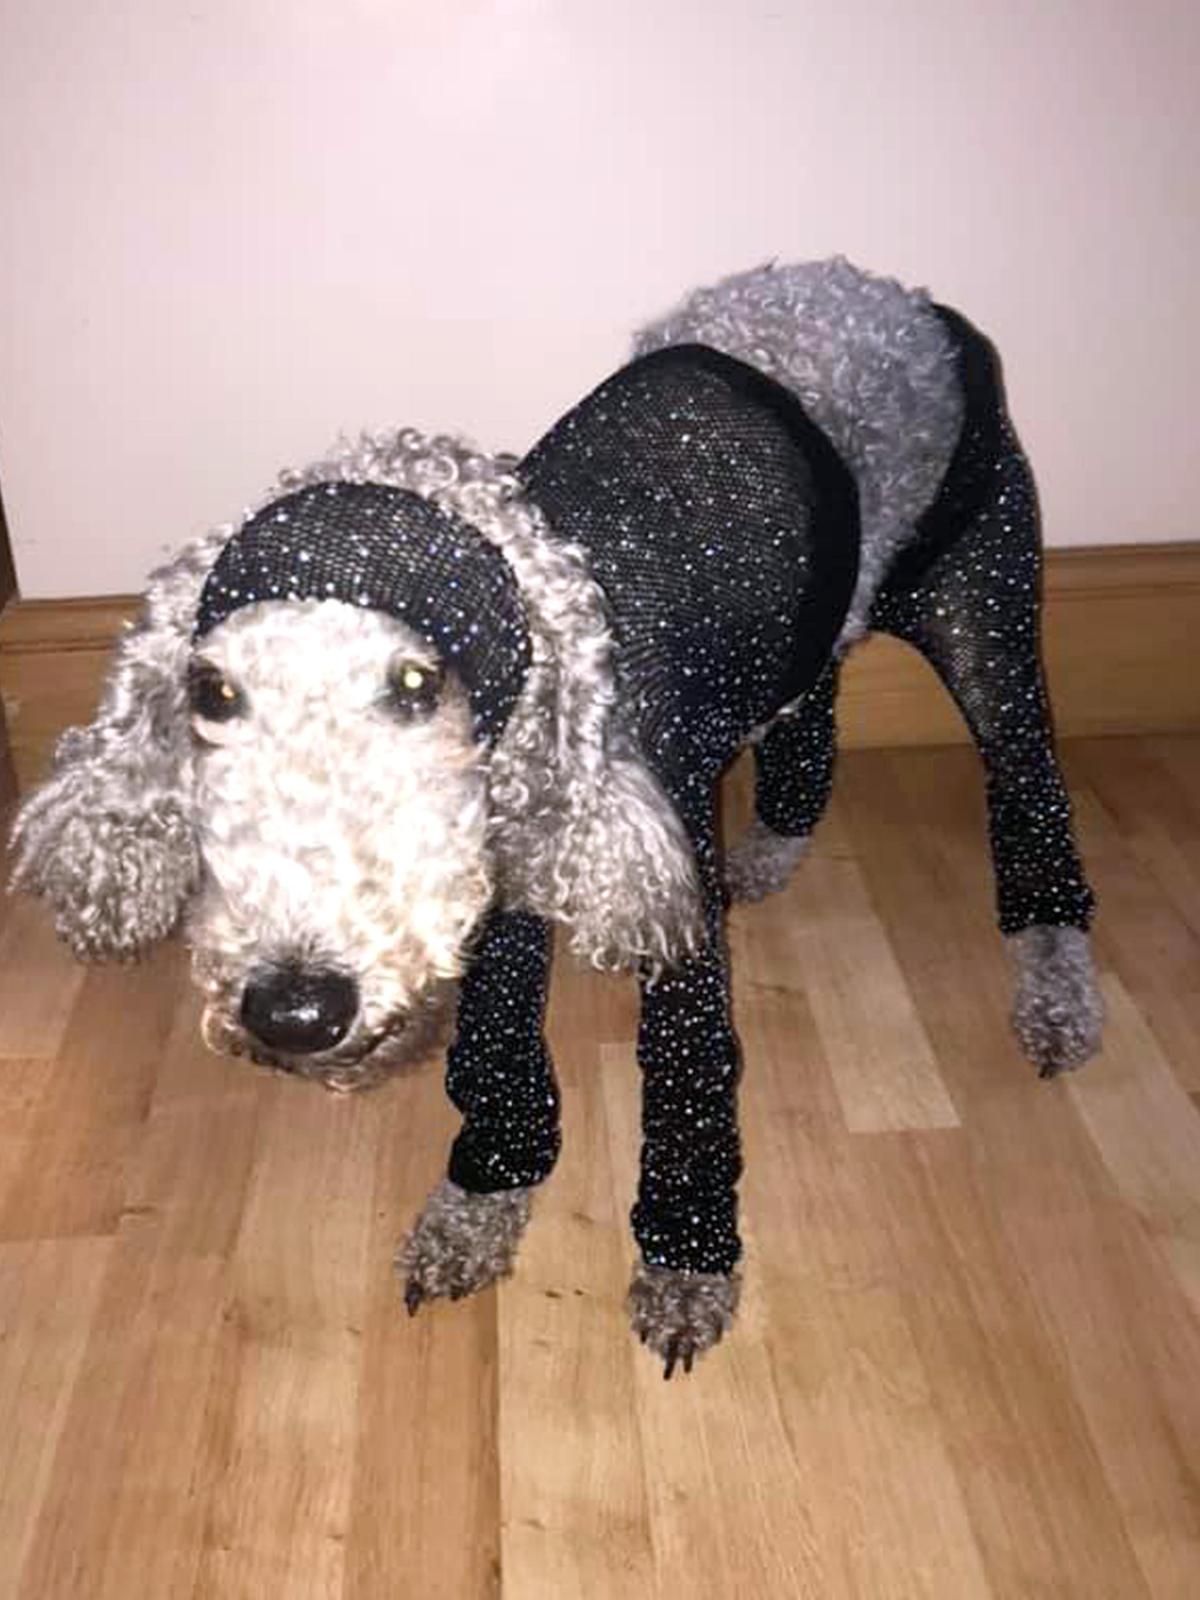 Charlotte the dog wearing the outfit Callie brought from Depop (Caters News)